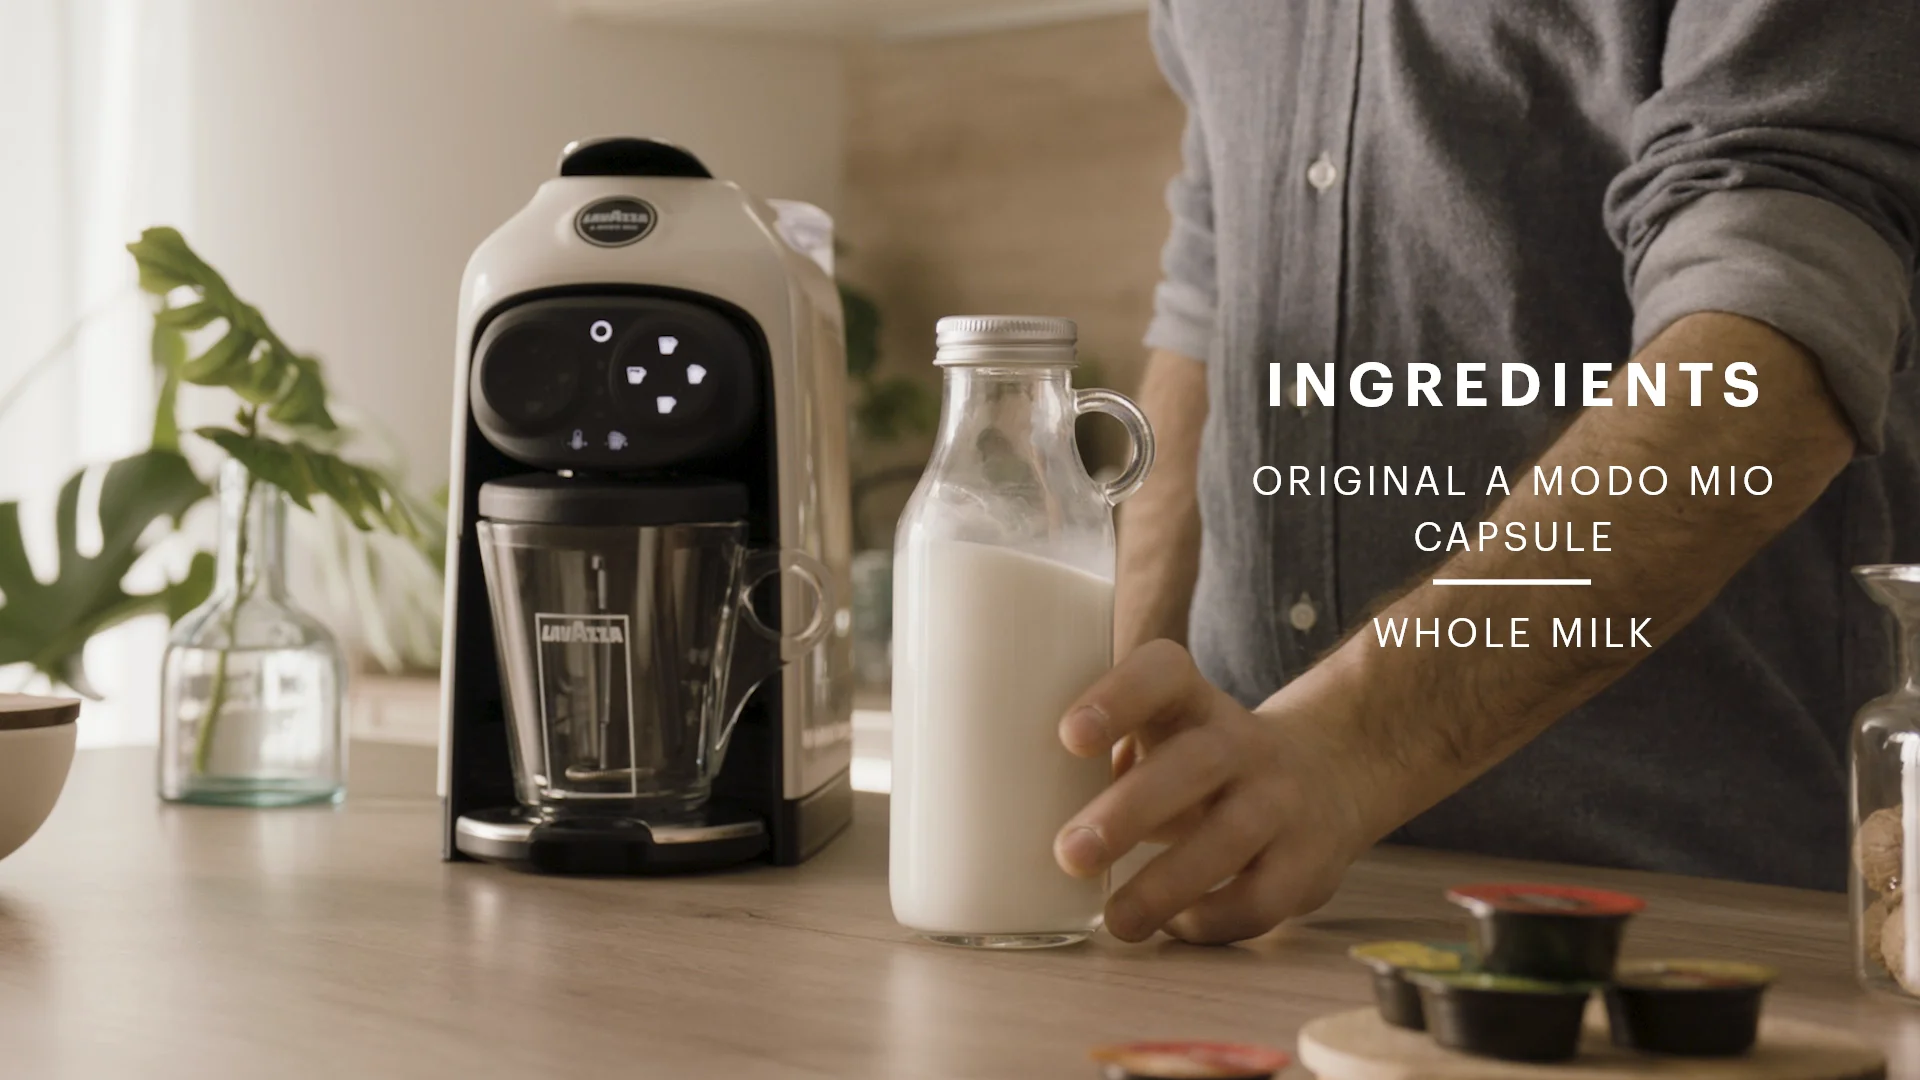 How to Make Cappuccino with Lavazza Desea One Touch on Vimeo